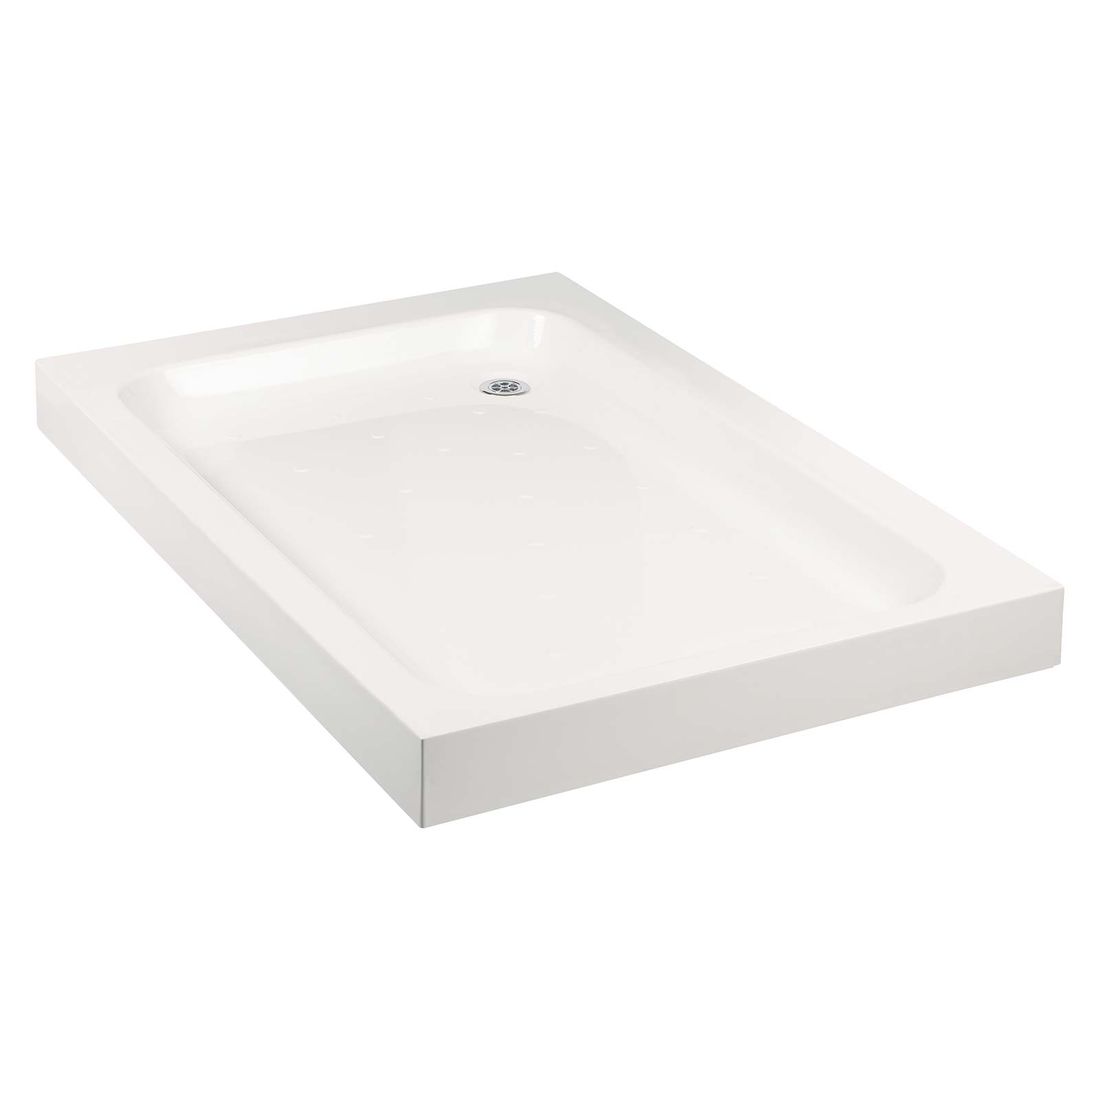 Shower Tray 1200 X 760Mm Abs Stone Resin White